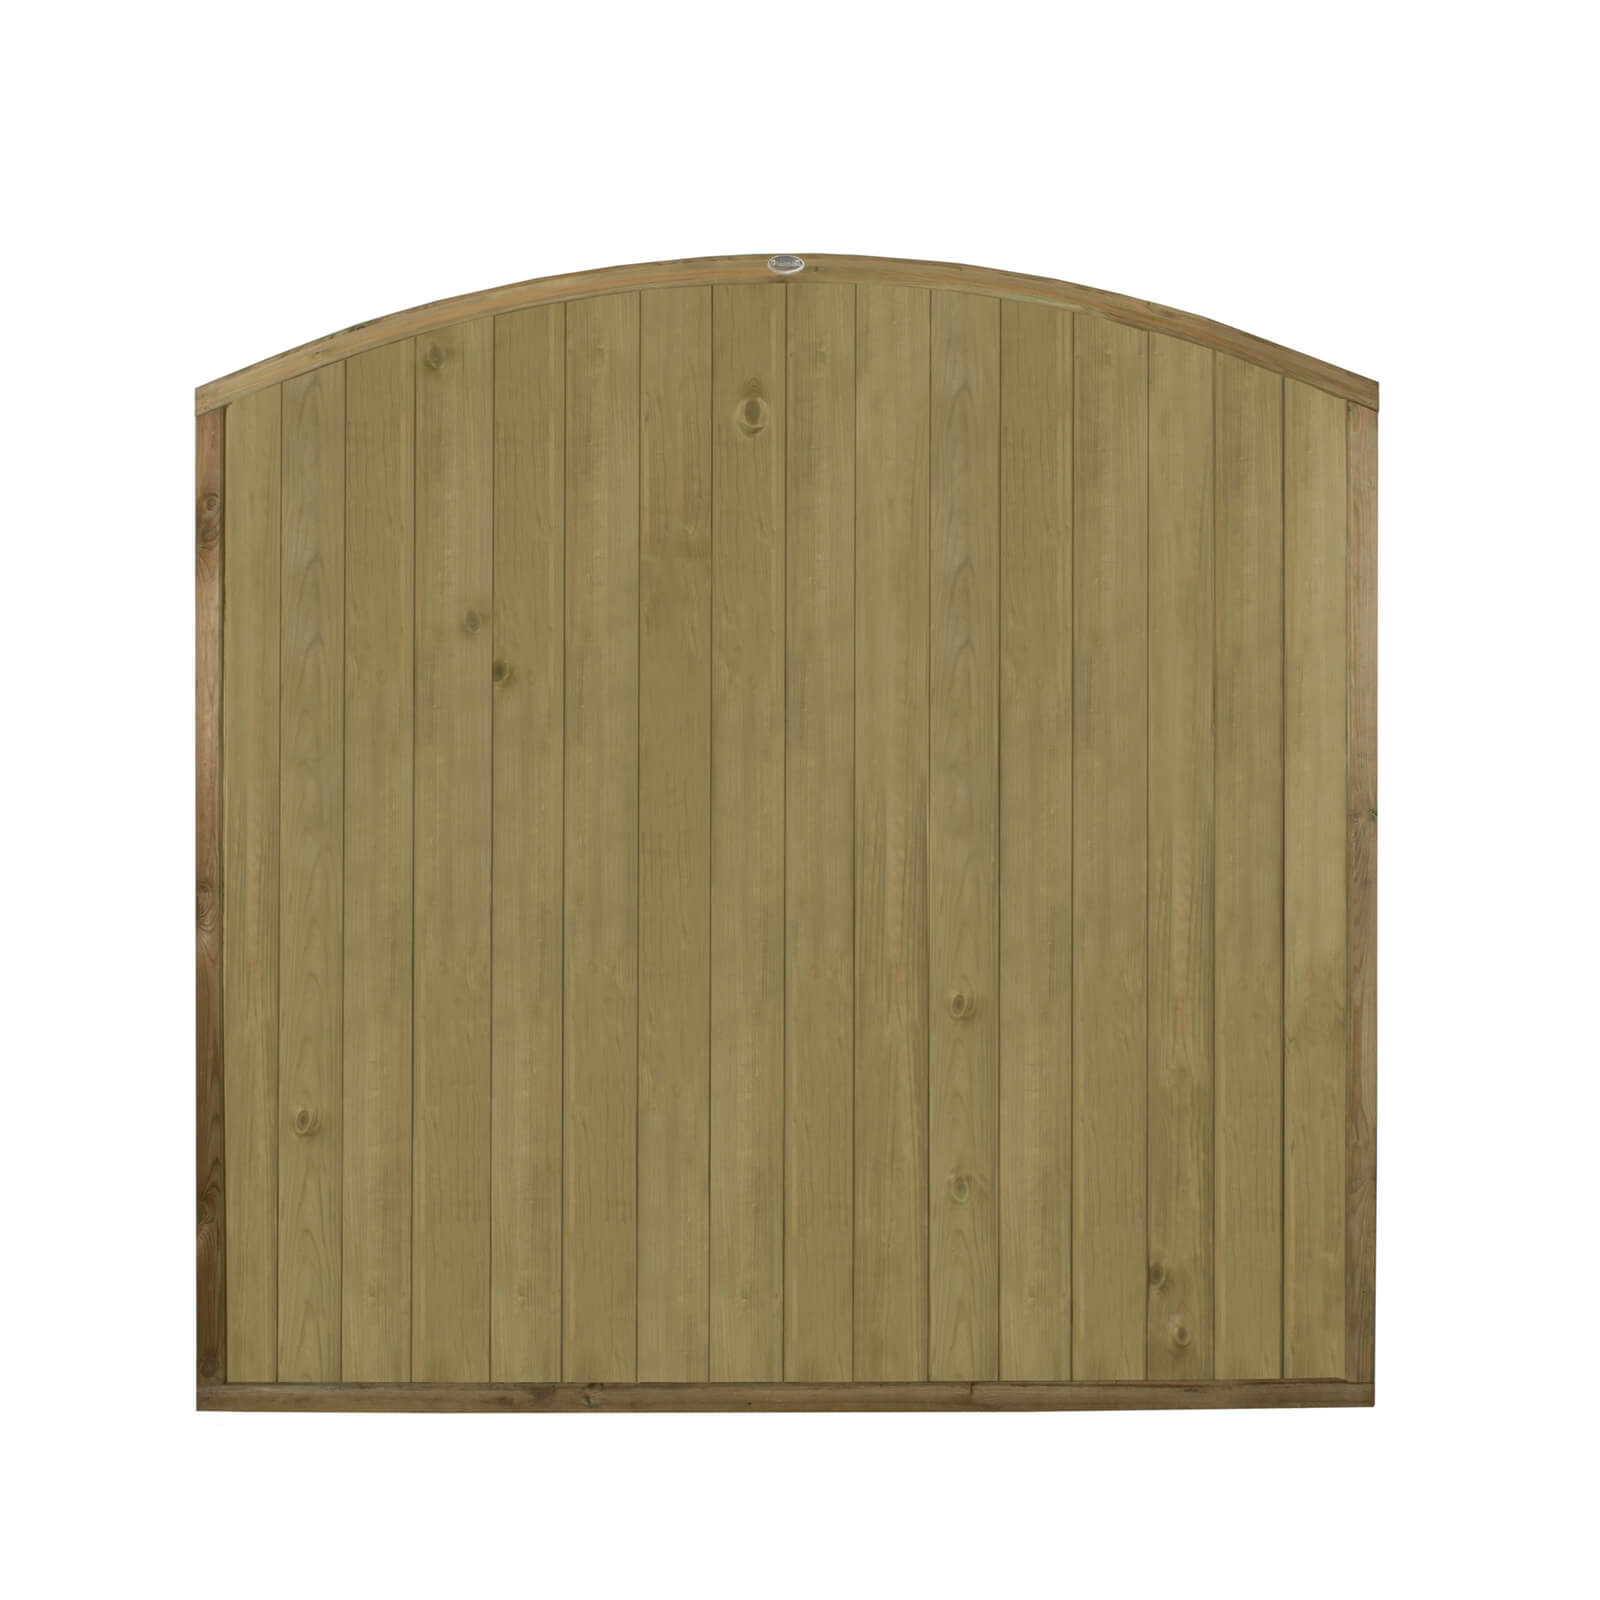 Forest Dome Tongue and Groove Panel - 6ft - Pack of 4